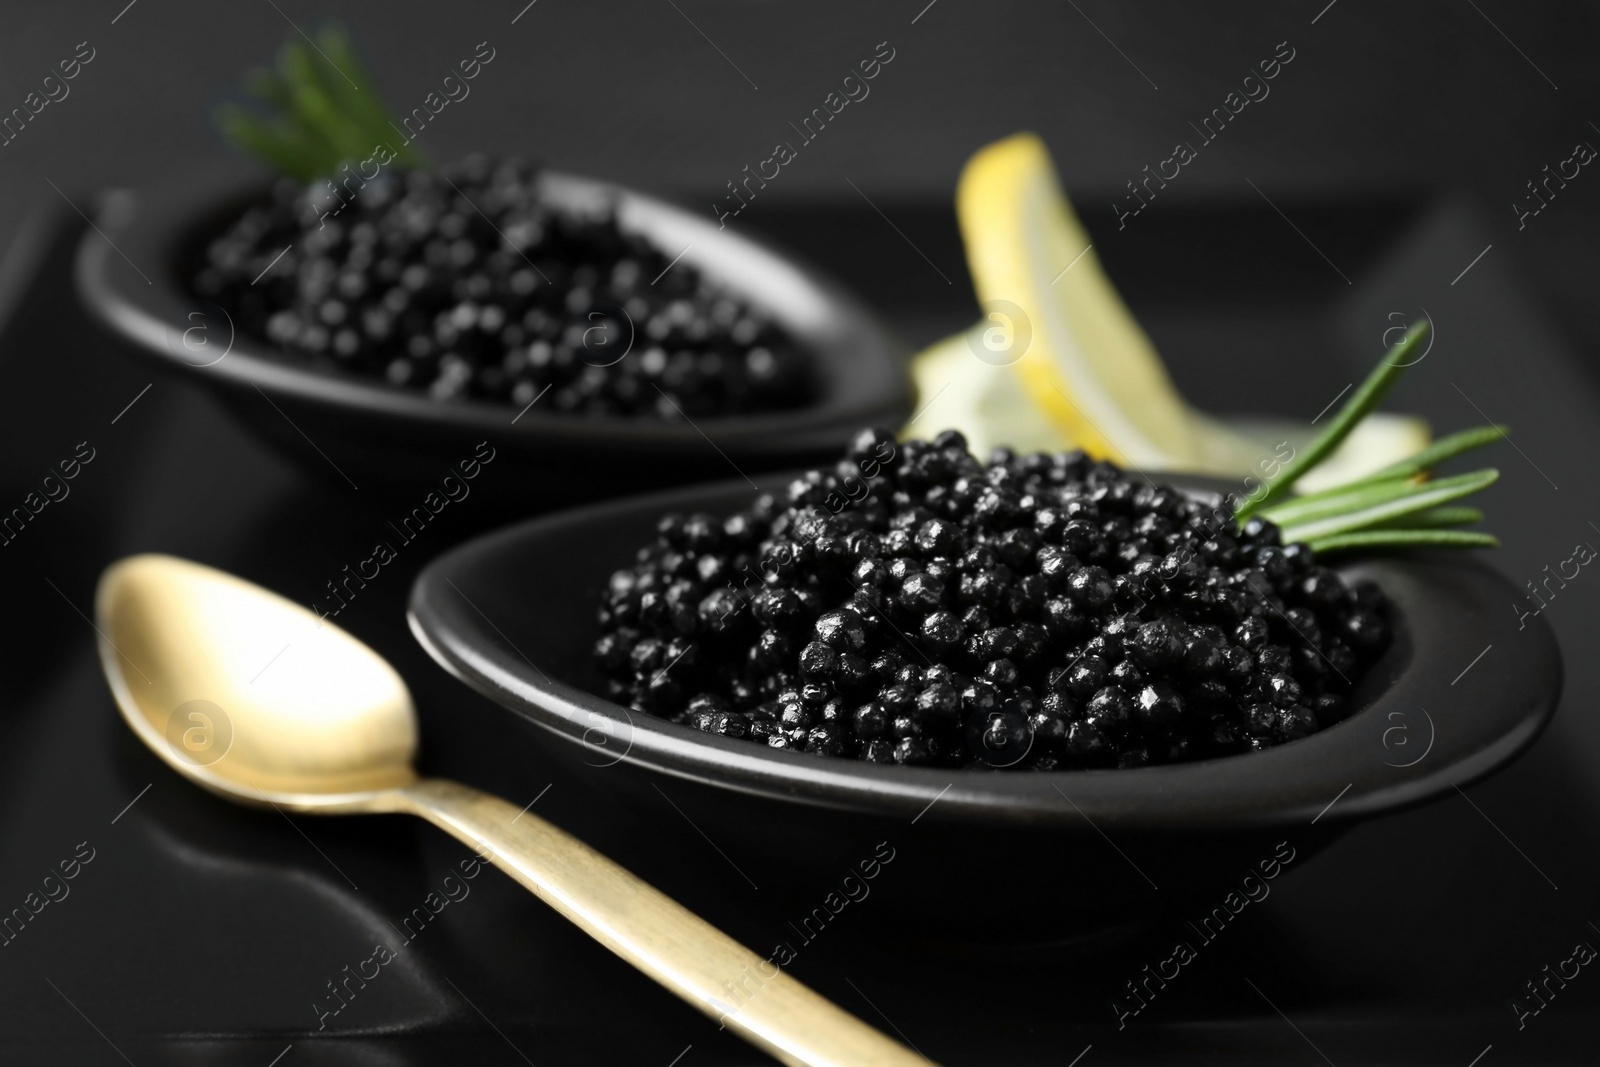 Photo of Bowls with black caviar on plate, closeup